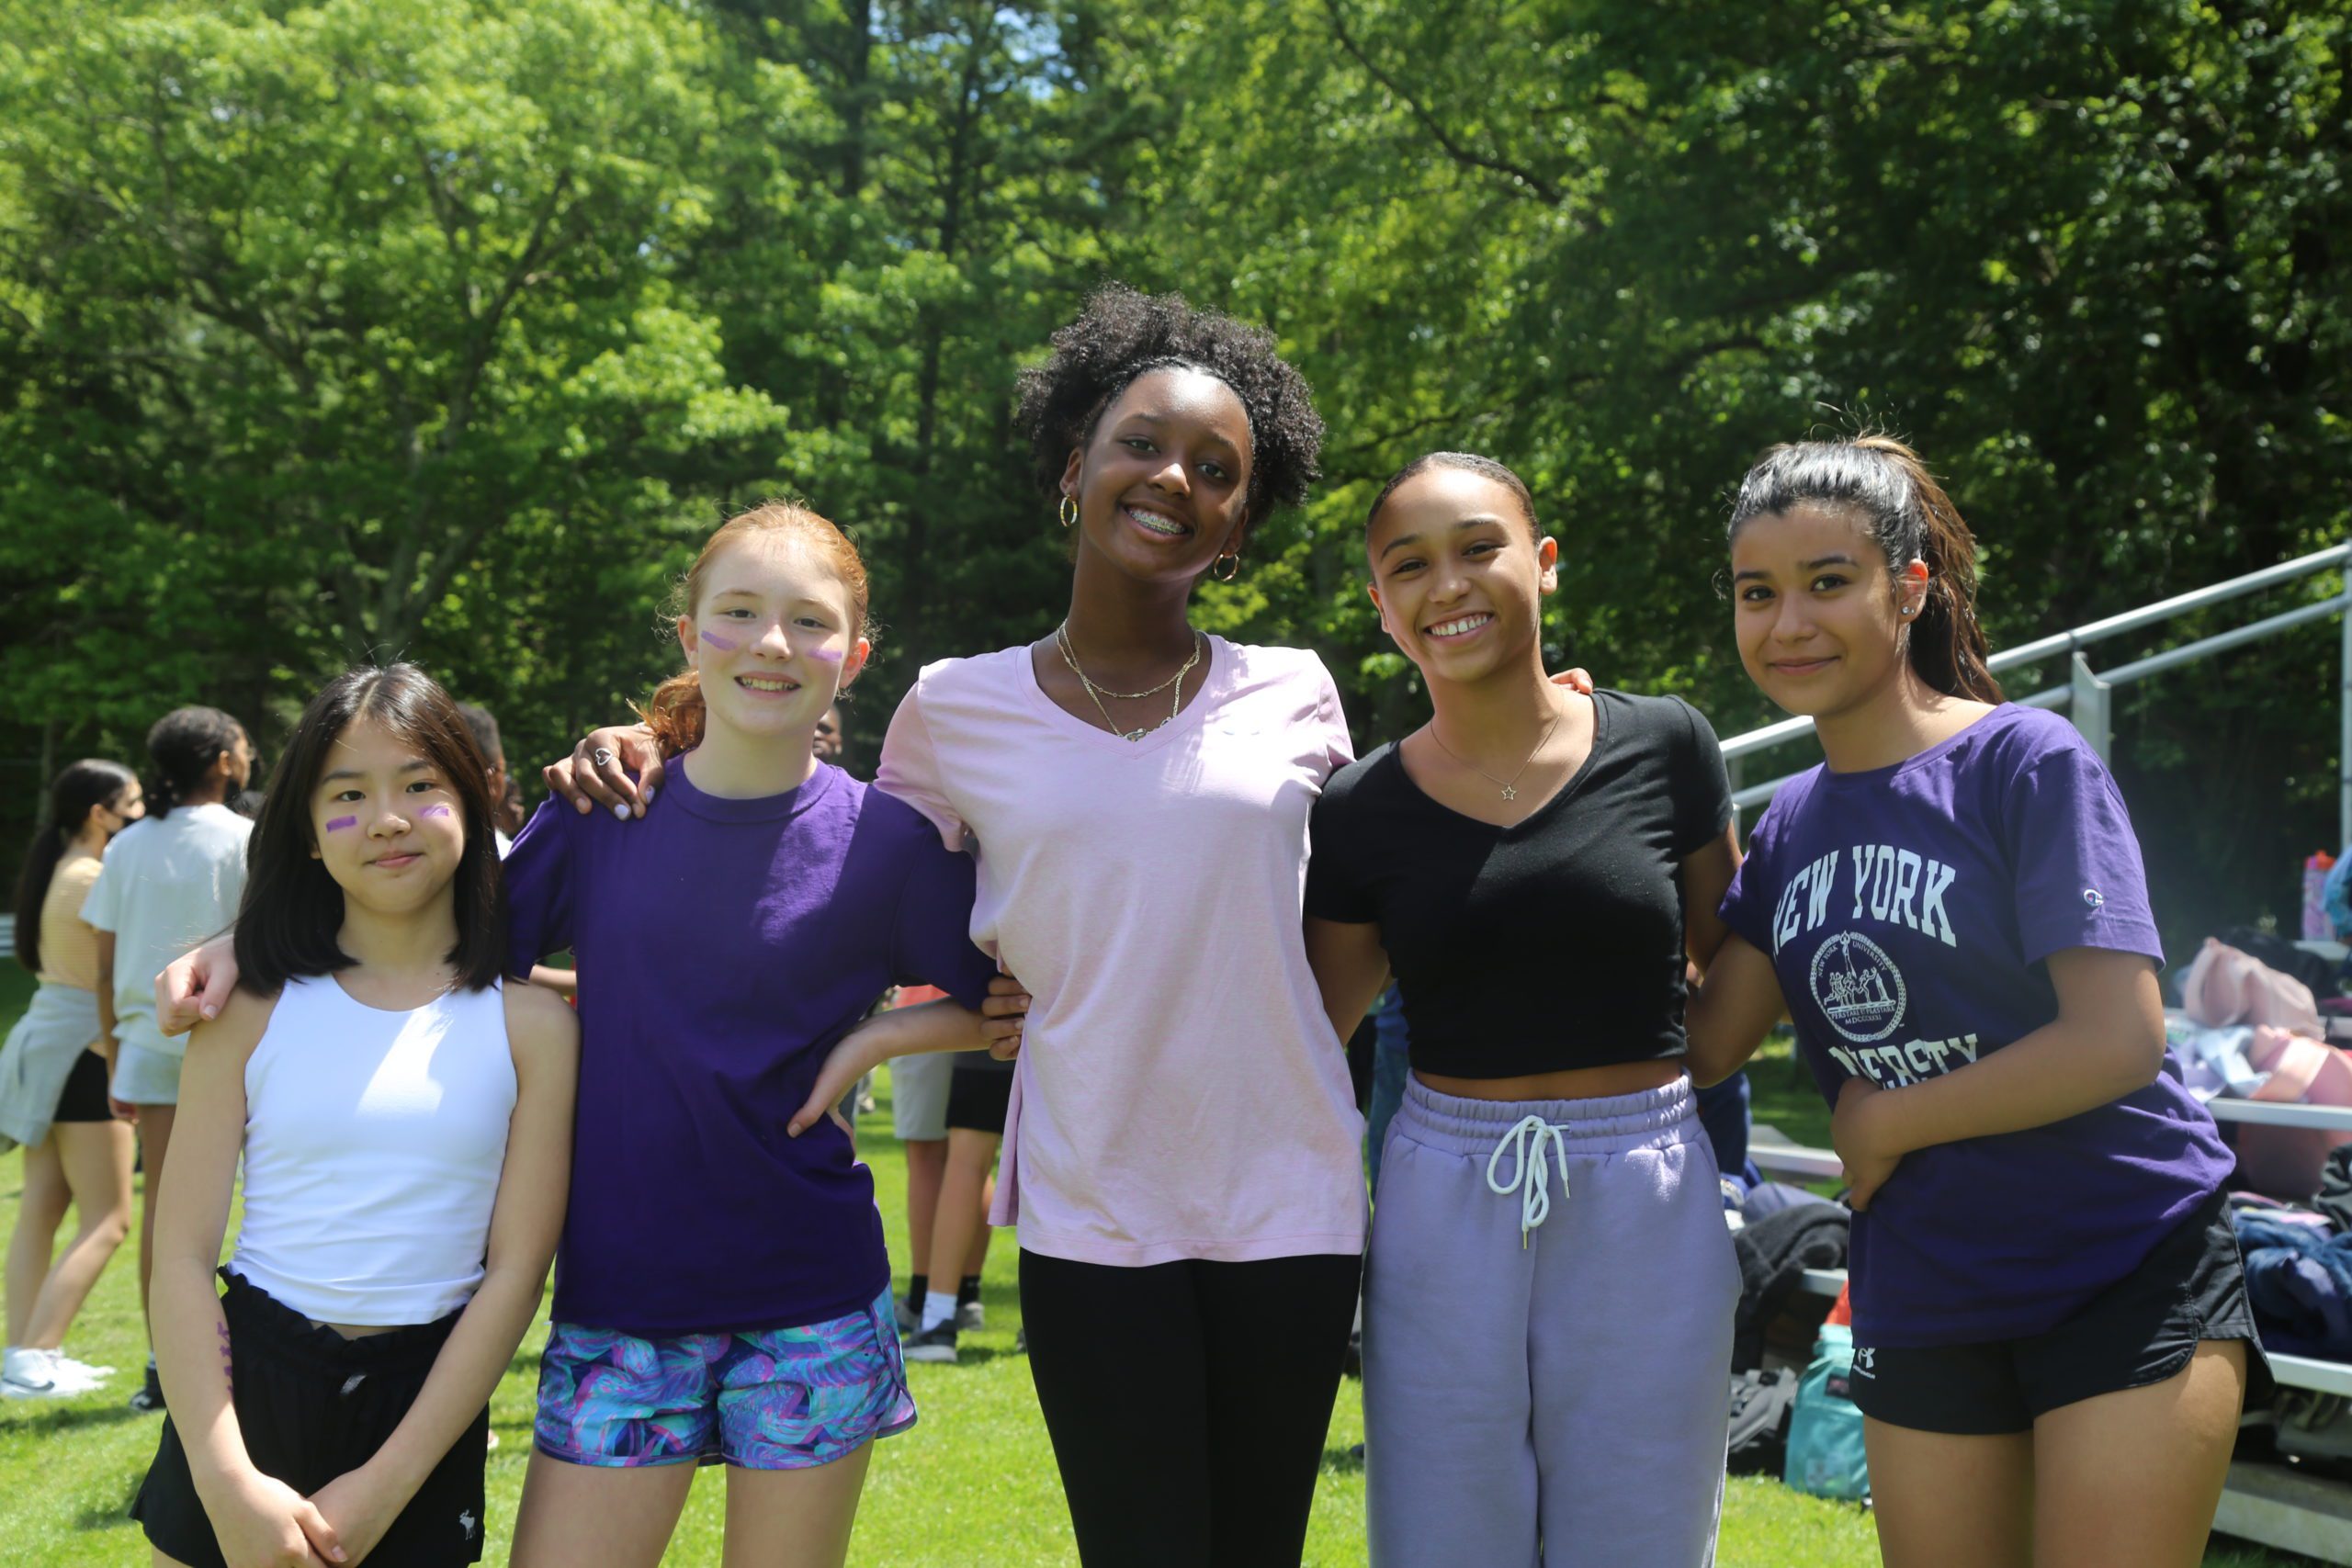 Students posing together during field day